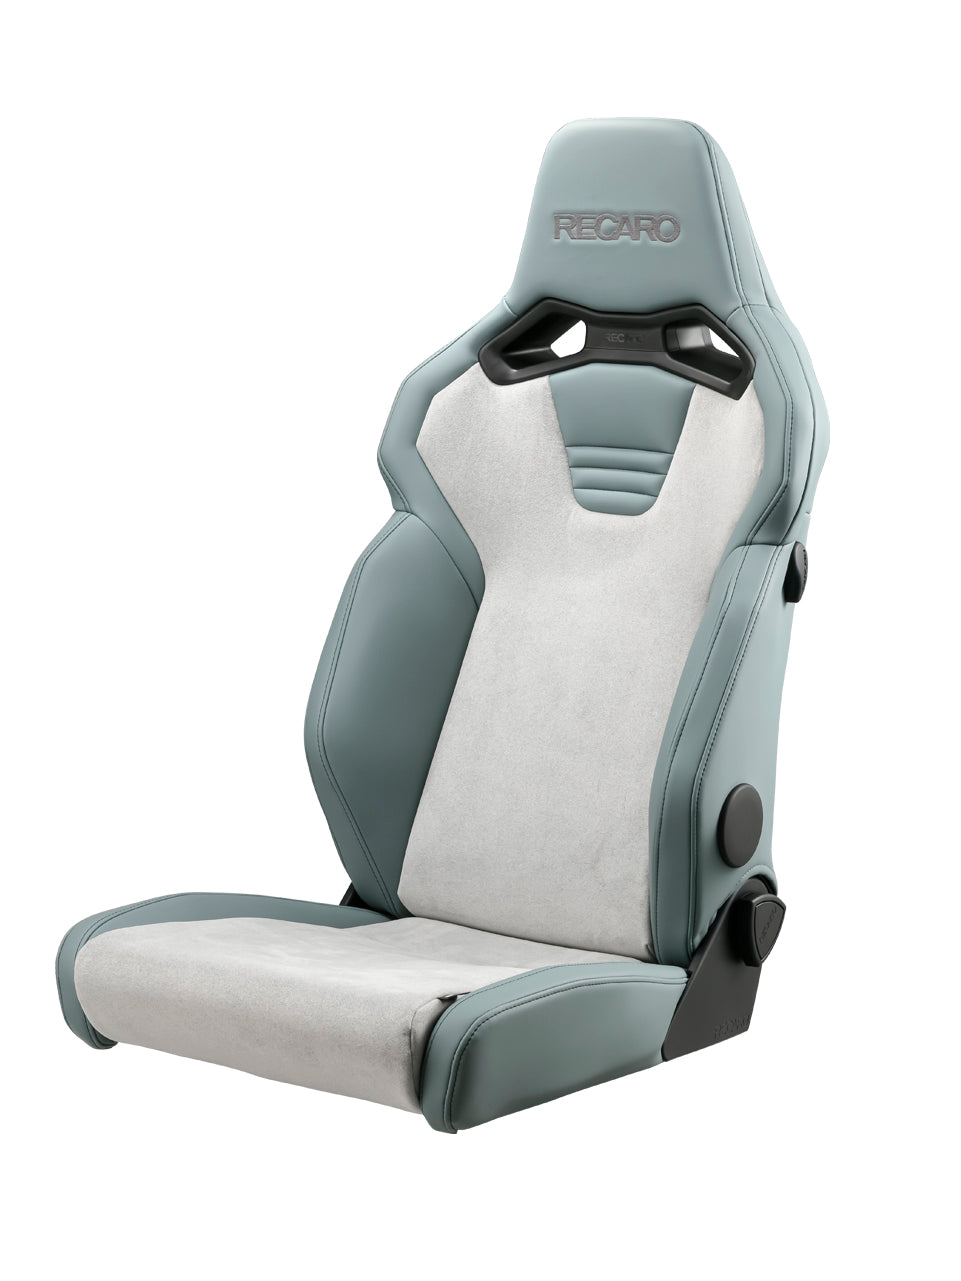 RECARO SR-C UT100 A R MG SG ARTIFICIAL LEATHER SURGE GRAY COLOR AND ULTRA SUEDE MELANGE GRAY COLOR SEAT ARMREST ATTACHEBLE FOR  81-121.28.648-0